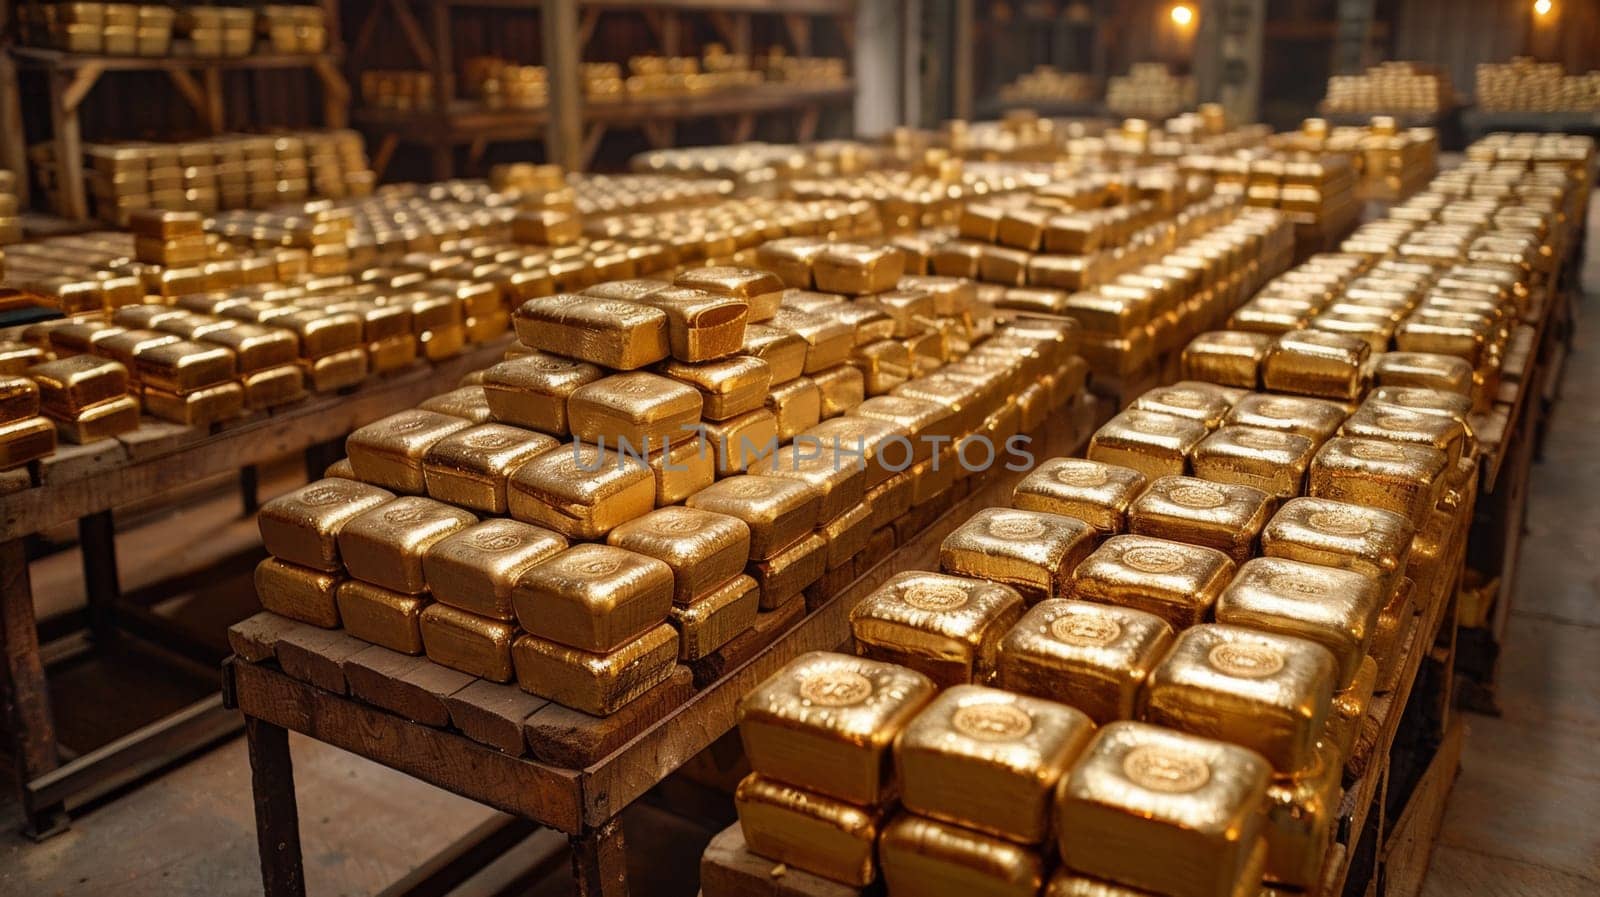 A warehouse full of gold bars stacked on wooden pallets